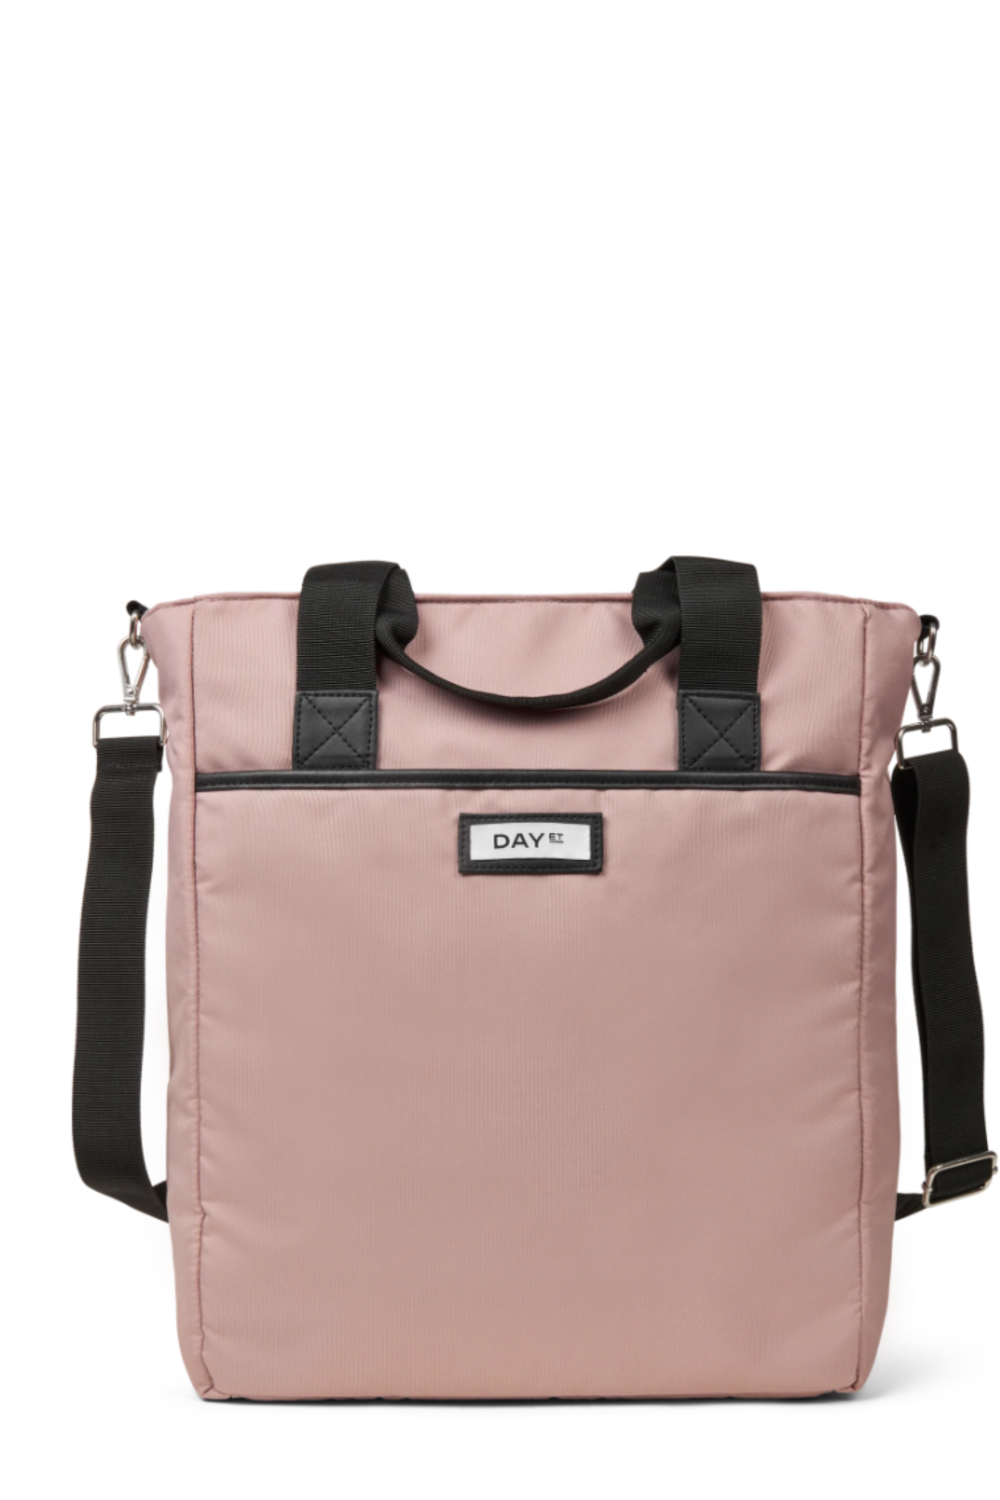 Day Gweneth RE-S Tote Travel - Cloud rose